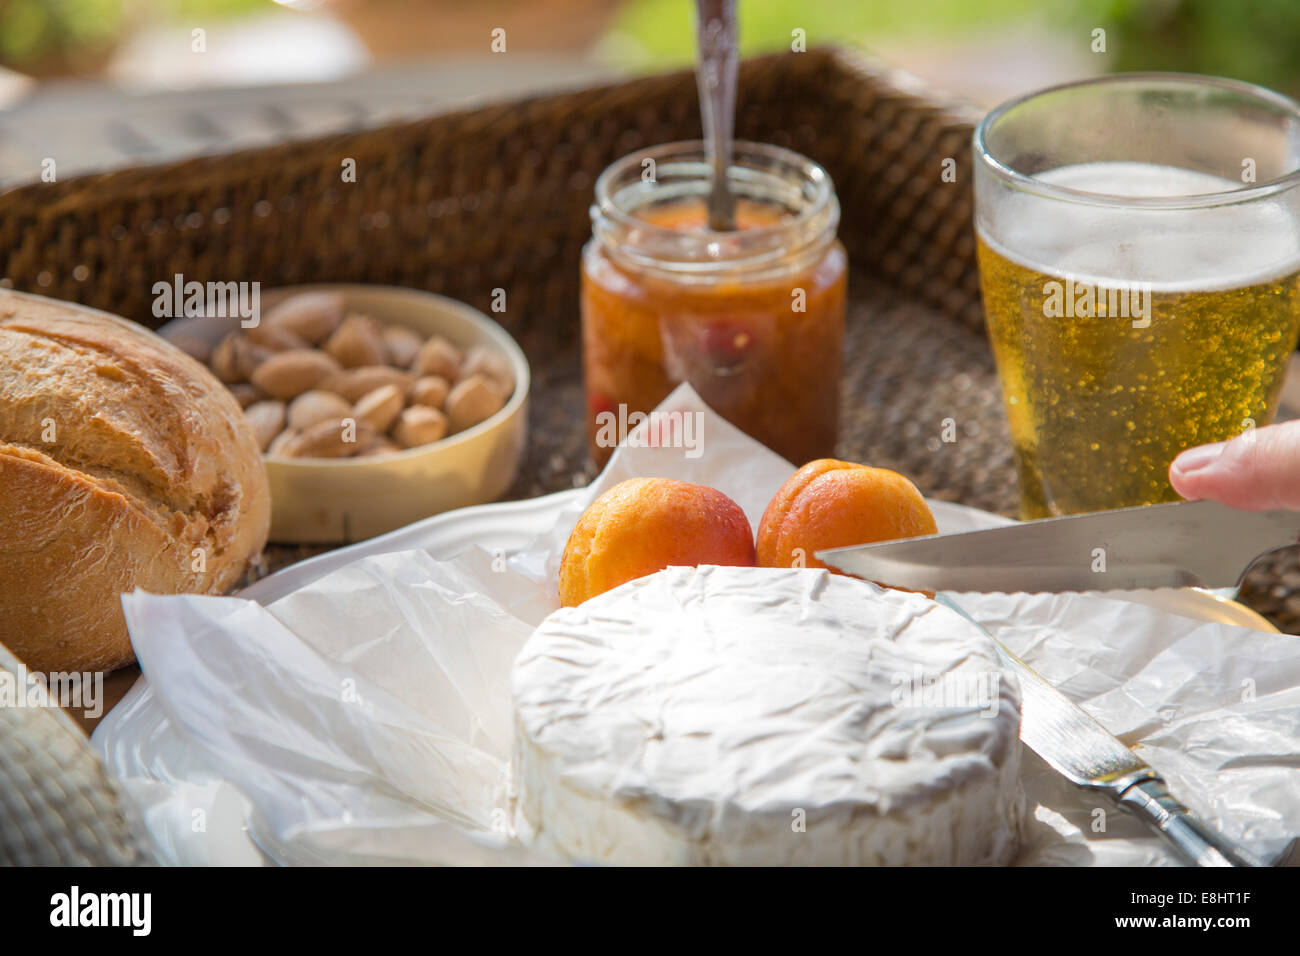 camembert cheese being cut, with apricots, apricot chutney, almonds and beer, set on woven tray Stock Photo